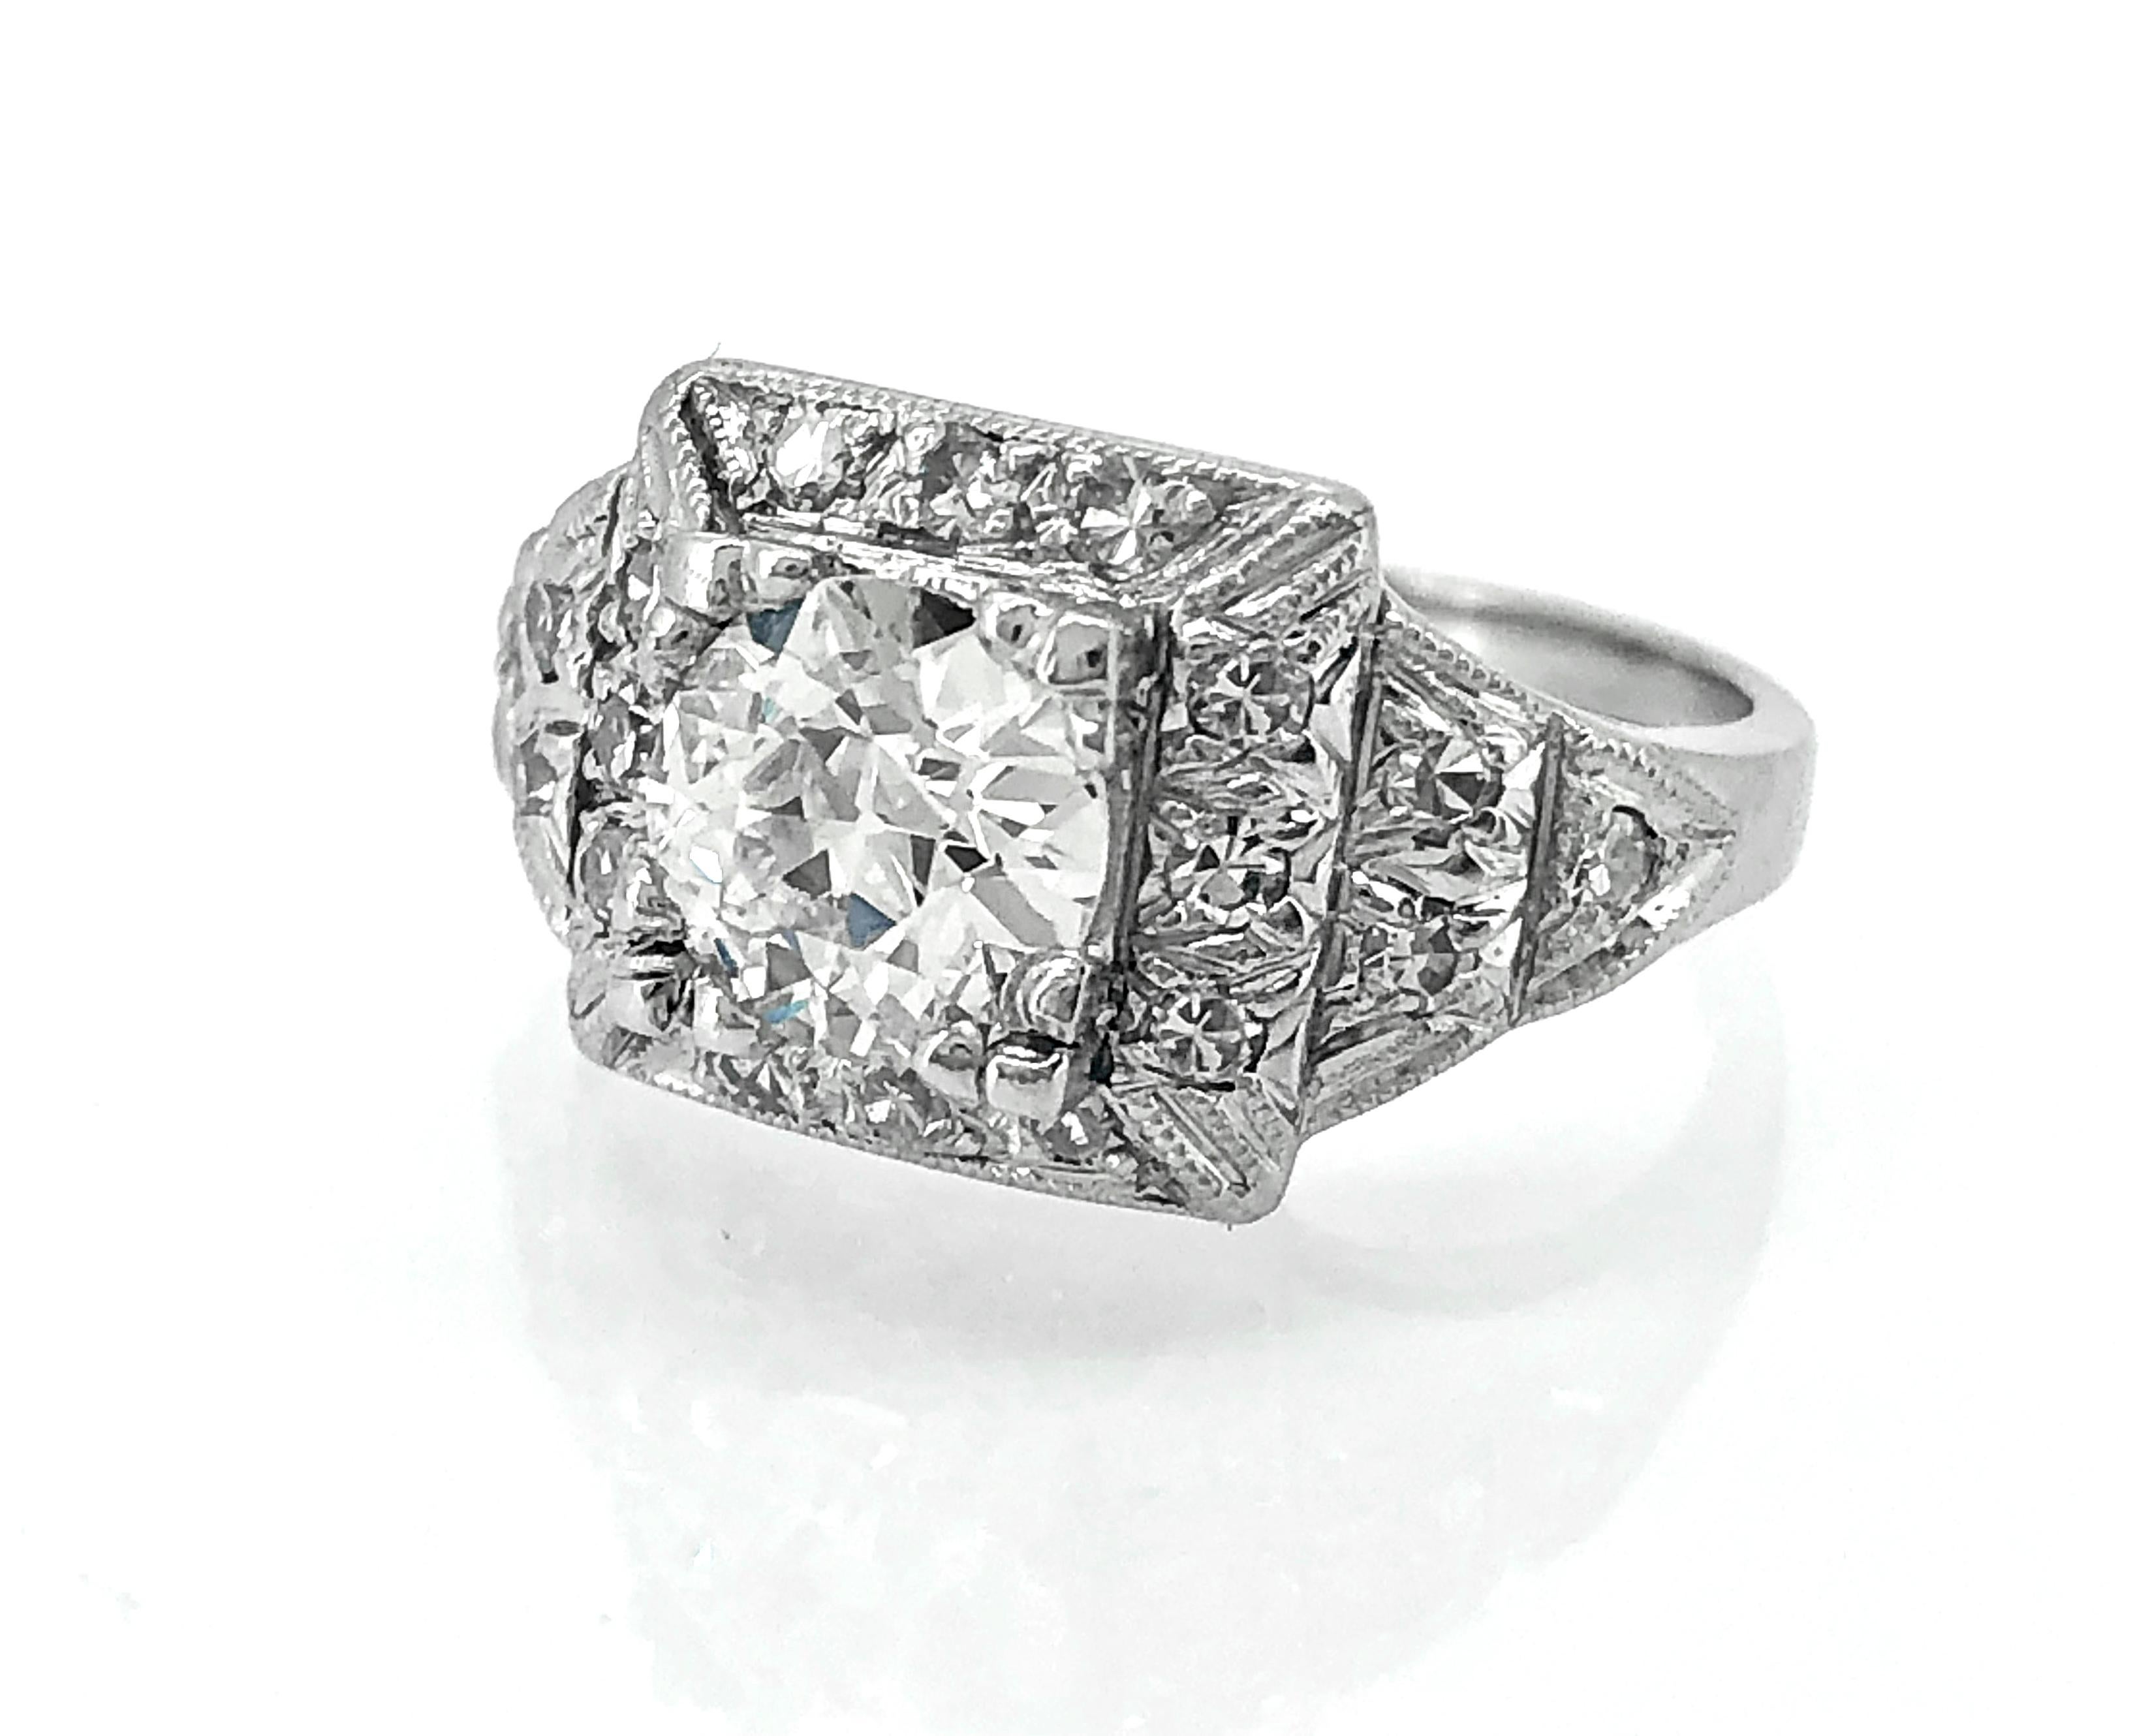 An exceptionally beautiful Art Deco engagement ring featuring a center diamond weighing 1.23ct. apx. of I color and VS2 clarity. The shoulders have 3 step down panels featuring bright and lively diamond melee. The square top is framed by smaller